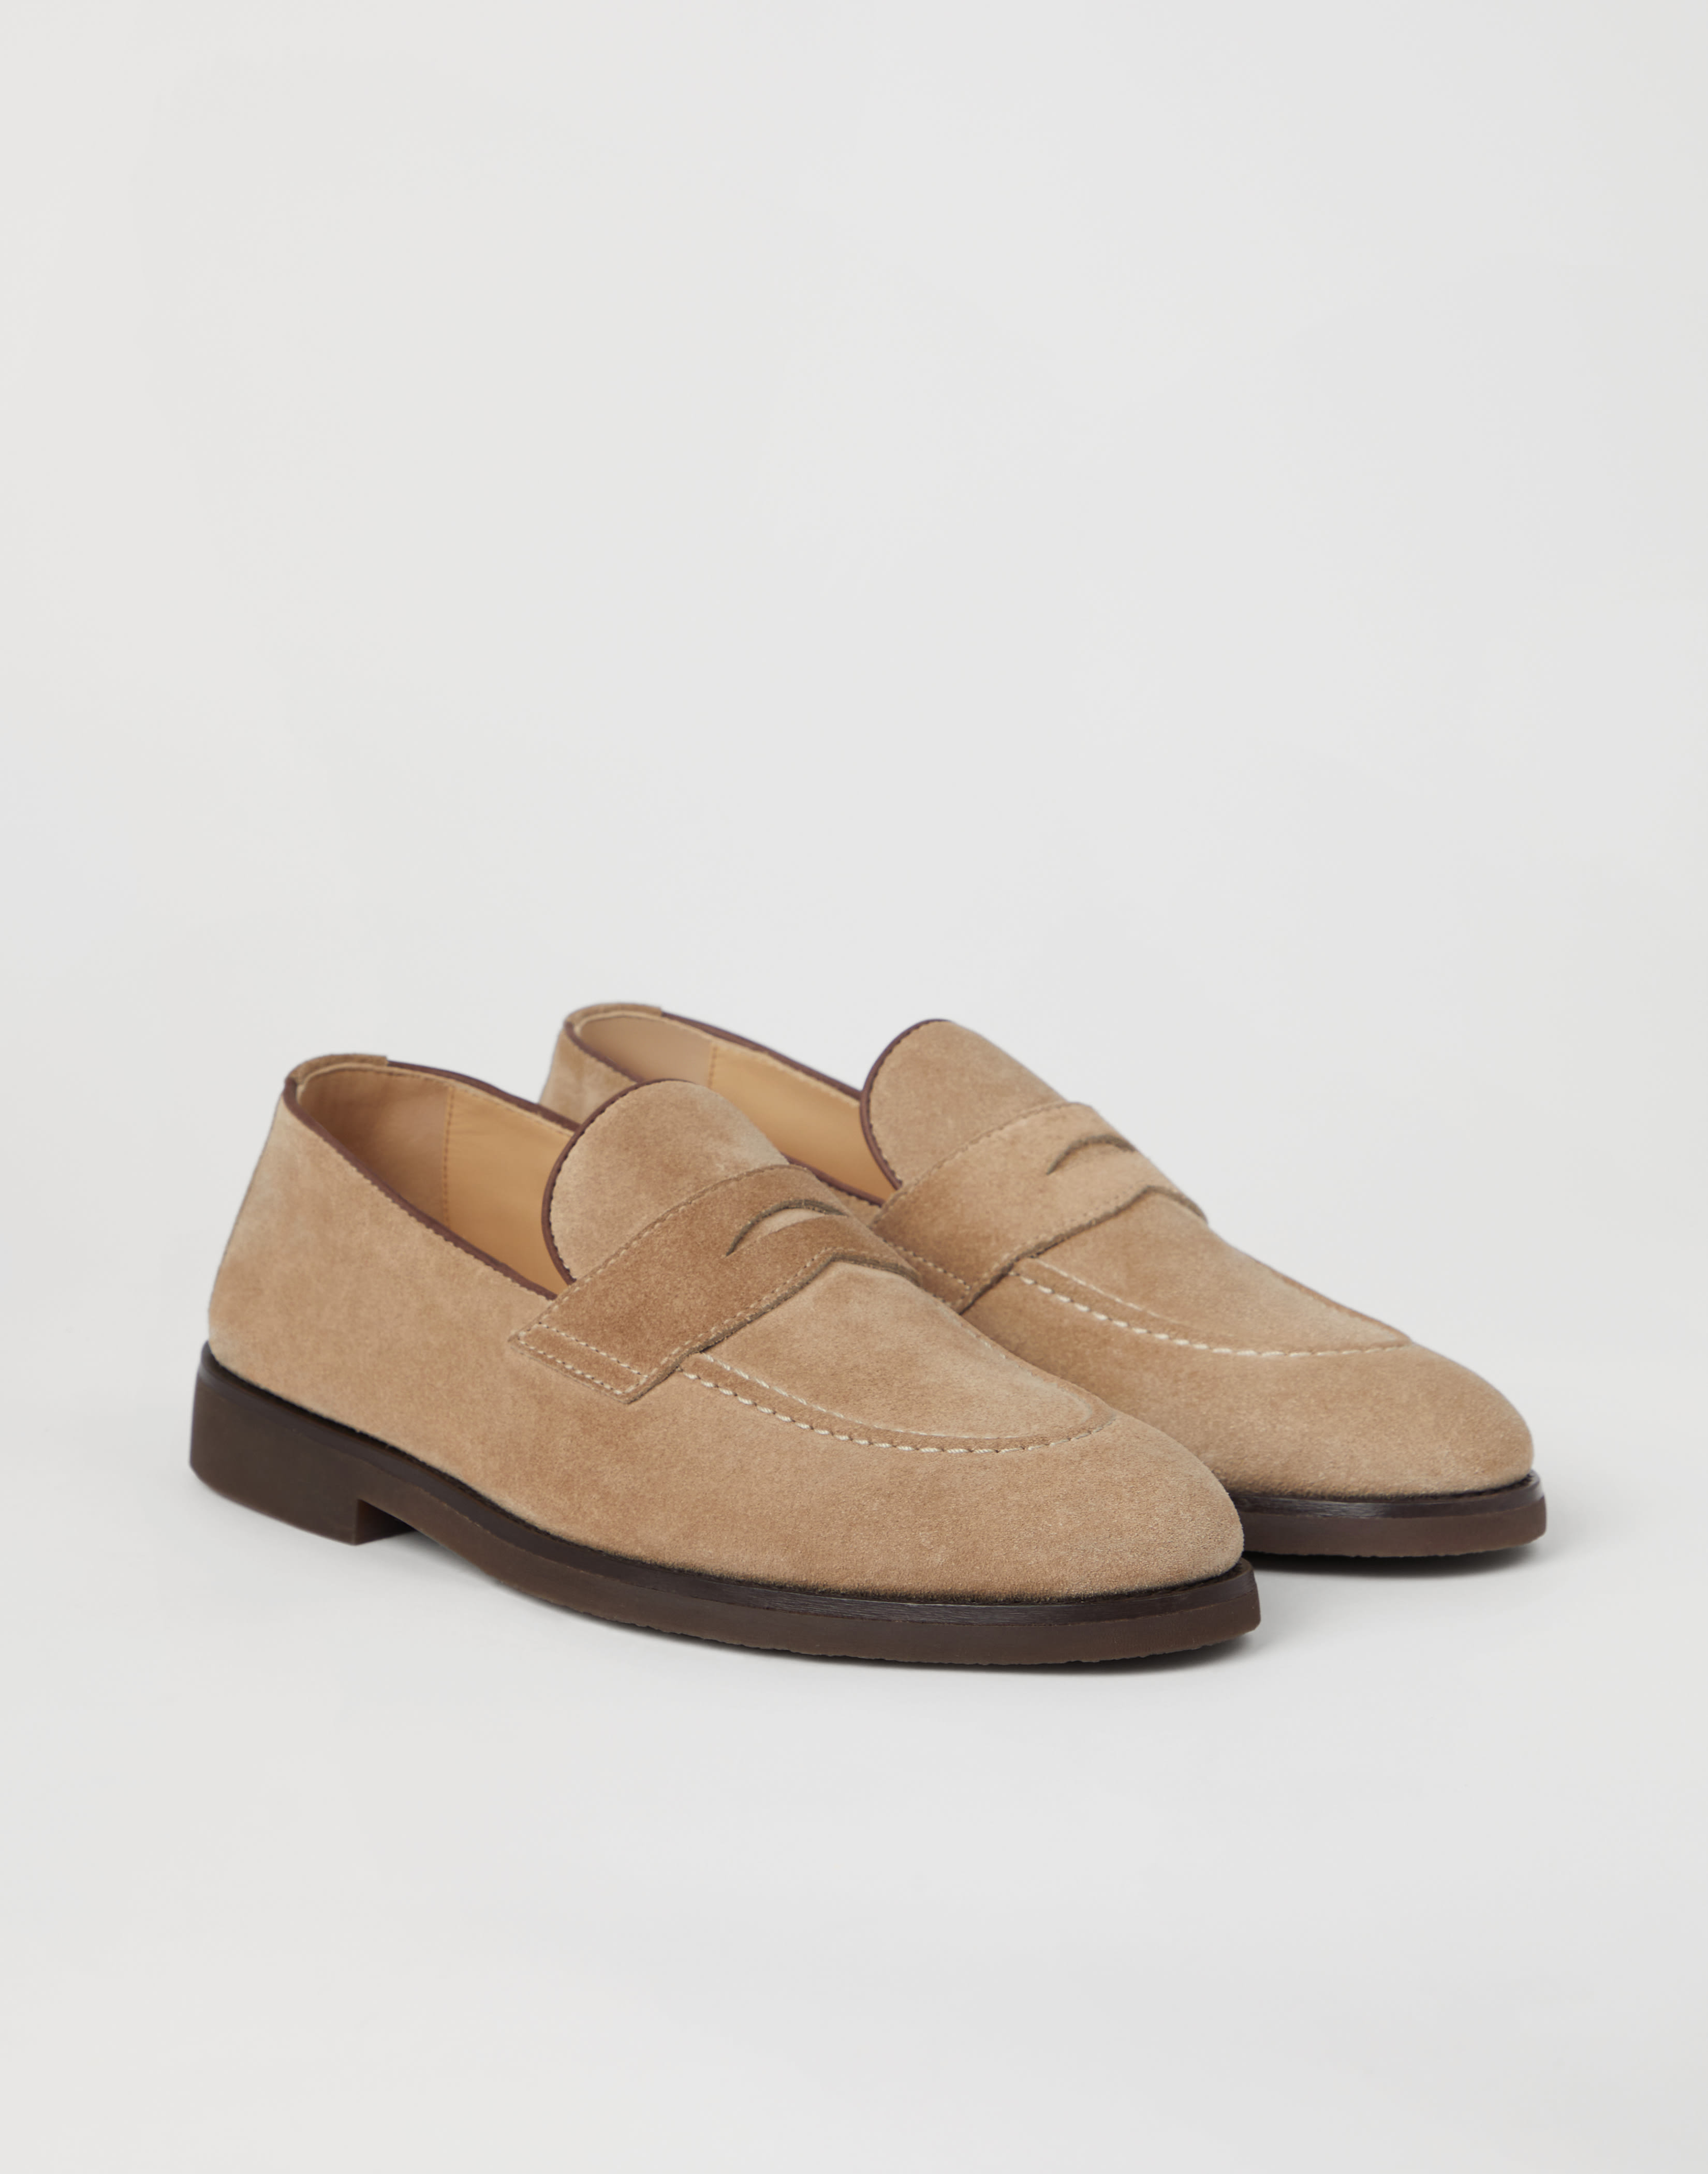 Penny Loafers - Front view